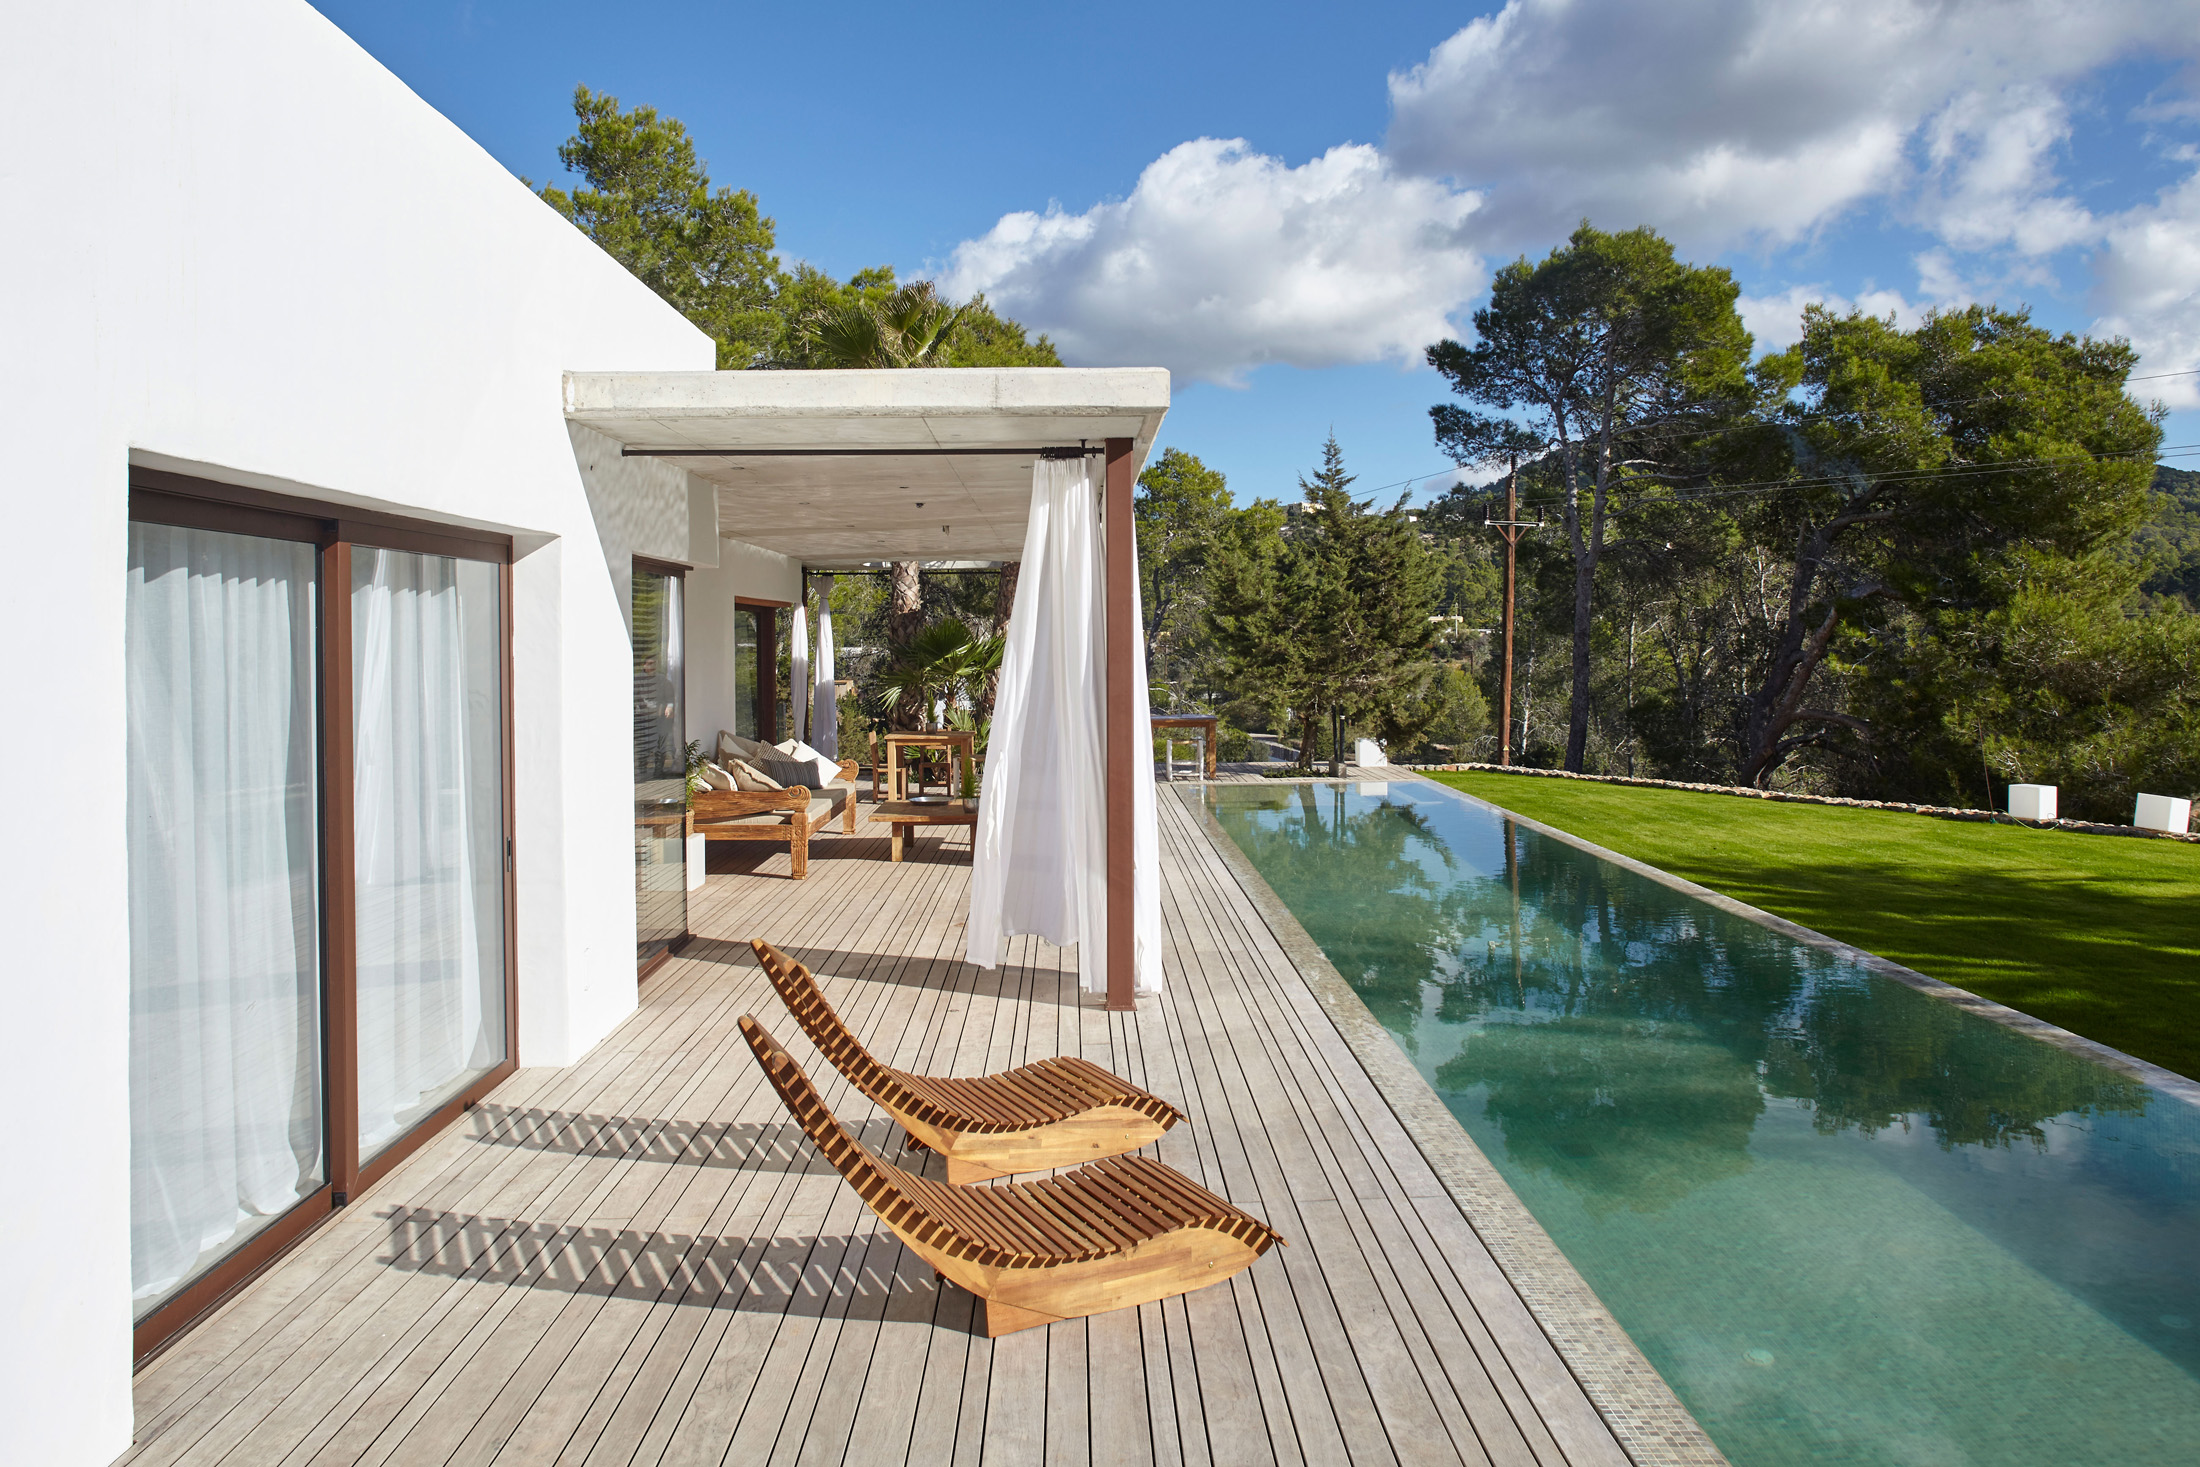 Pool furniture lounges in the sun at a luxurious Ibizan villa